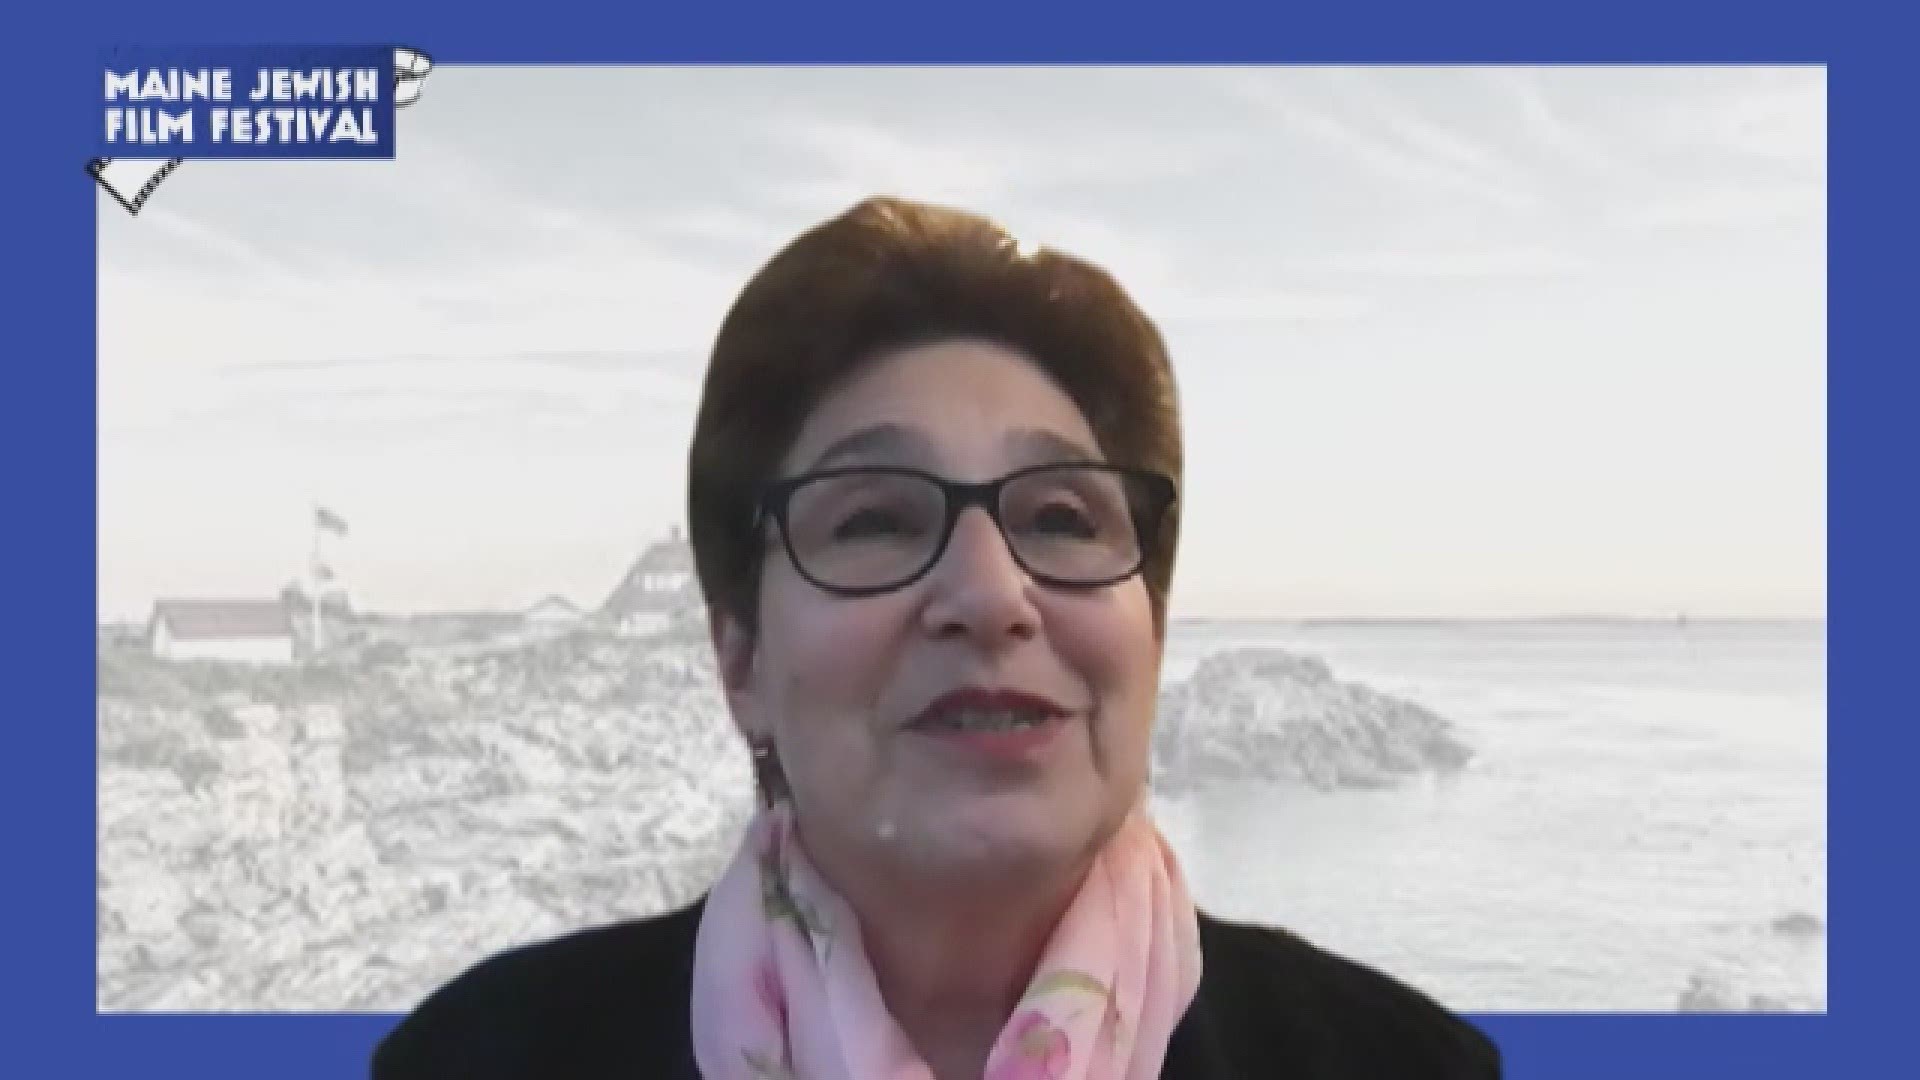 Watch our interview with Maine Jewish Film Festival executive director Barbara Merson to find out what is the festival offering this year.